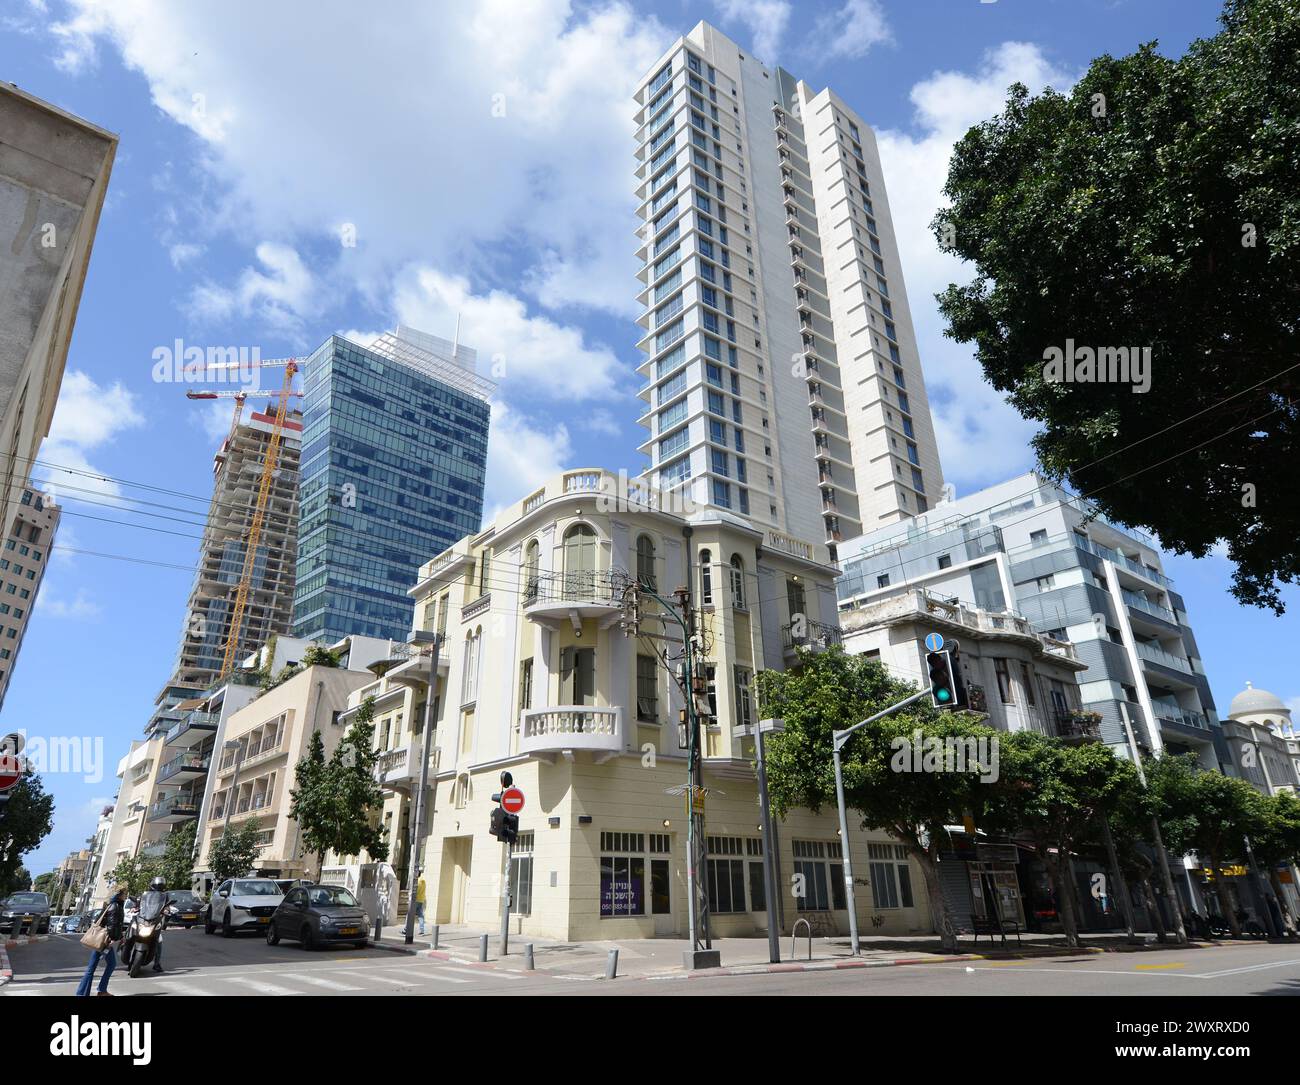 Modern buildings by old renovated buildings on the corner of Allenby St and Rothschild Boulevard in Tel-Aviv, Israel. Stock Photo